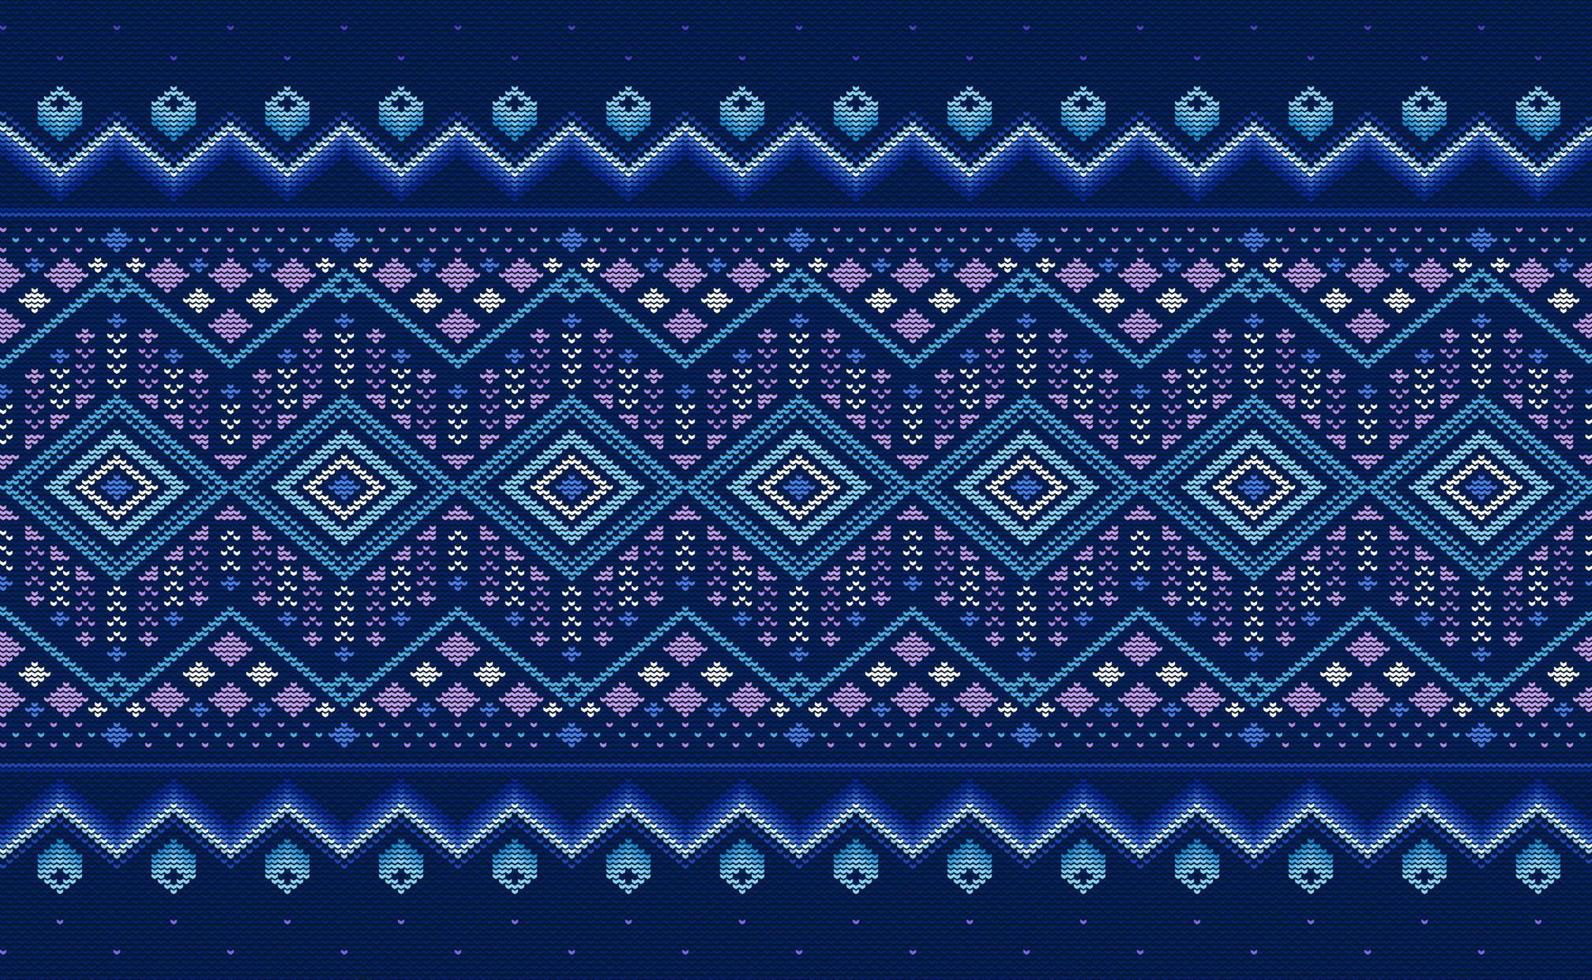 Knitted ethnic pattern, Vector cross stitch geometric background, Embroidery abstract beautiful style